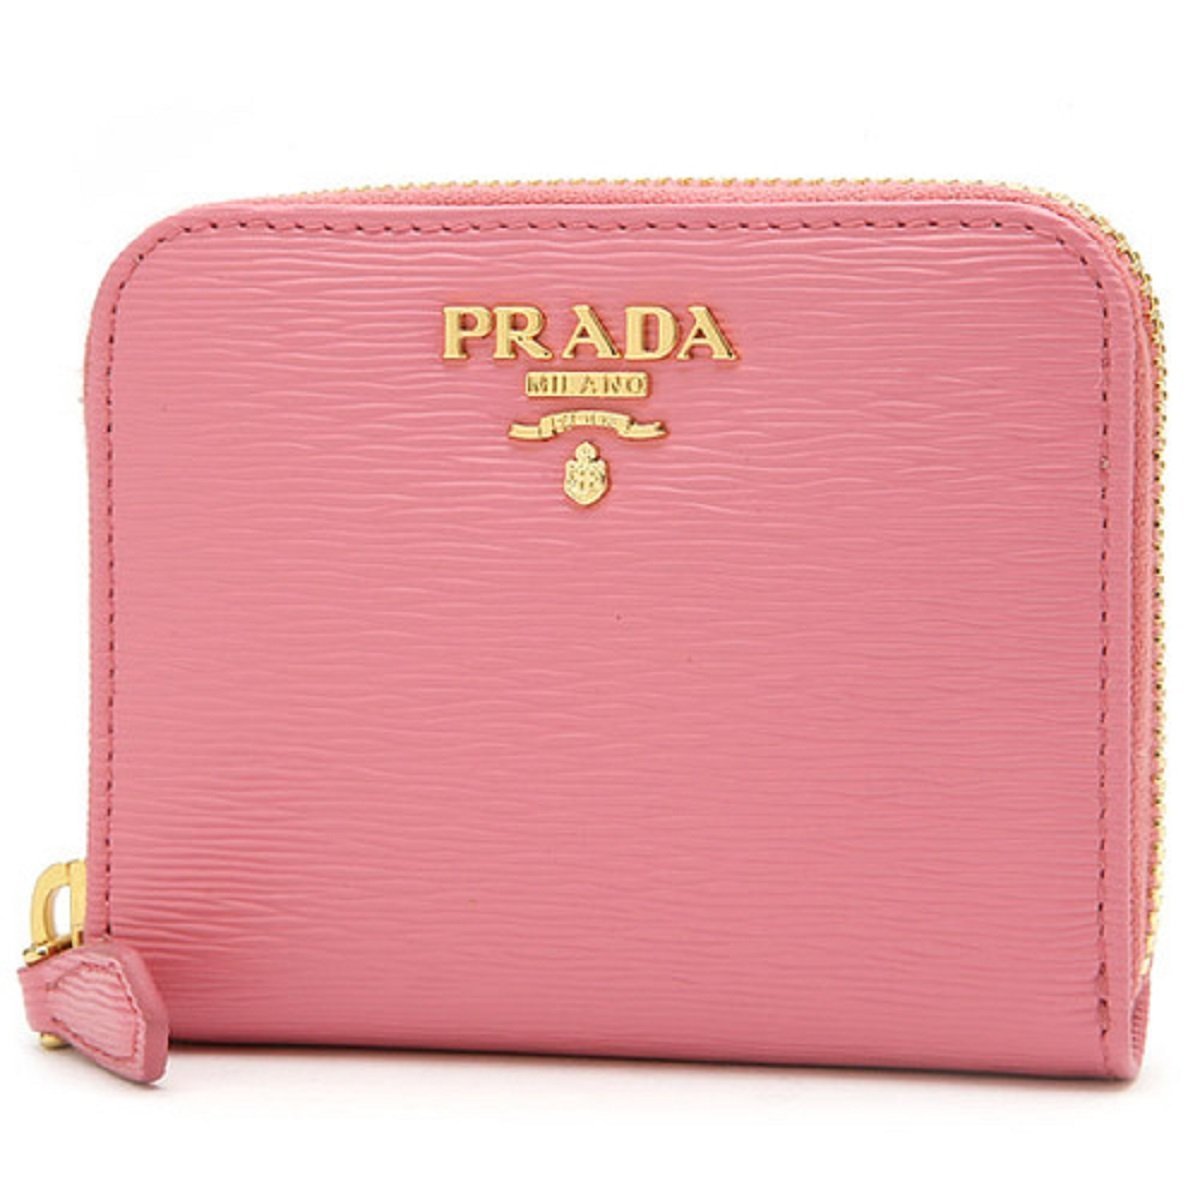 Prada Geranio Pink Saffiano Leather Gold Zip Coin Purse Wallet 1MM268 at_Queen_Bee_of_Beverly_Hills